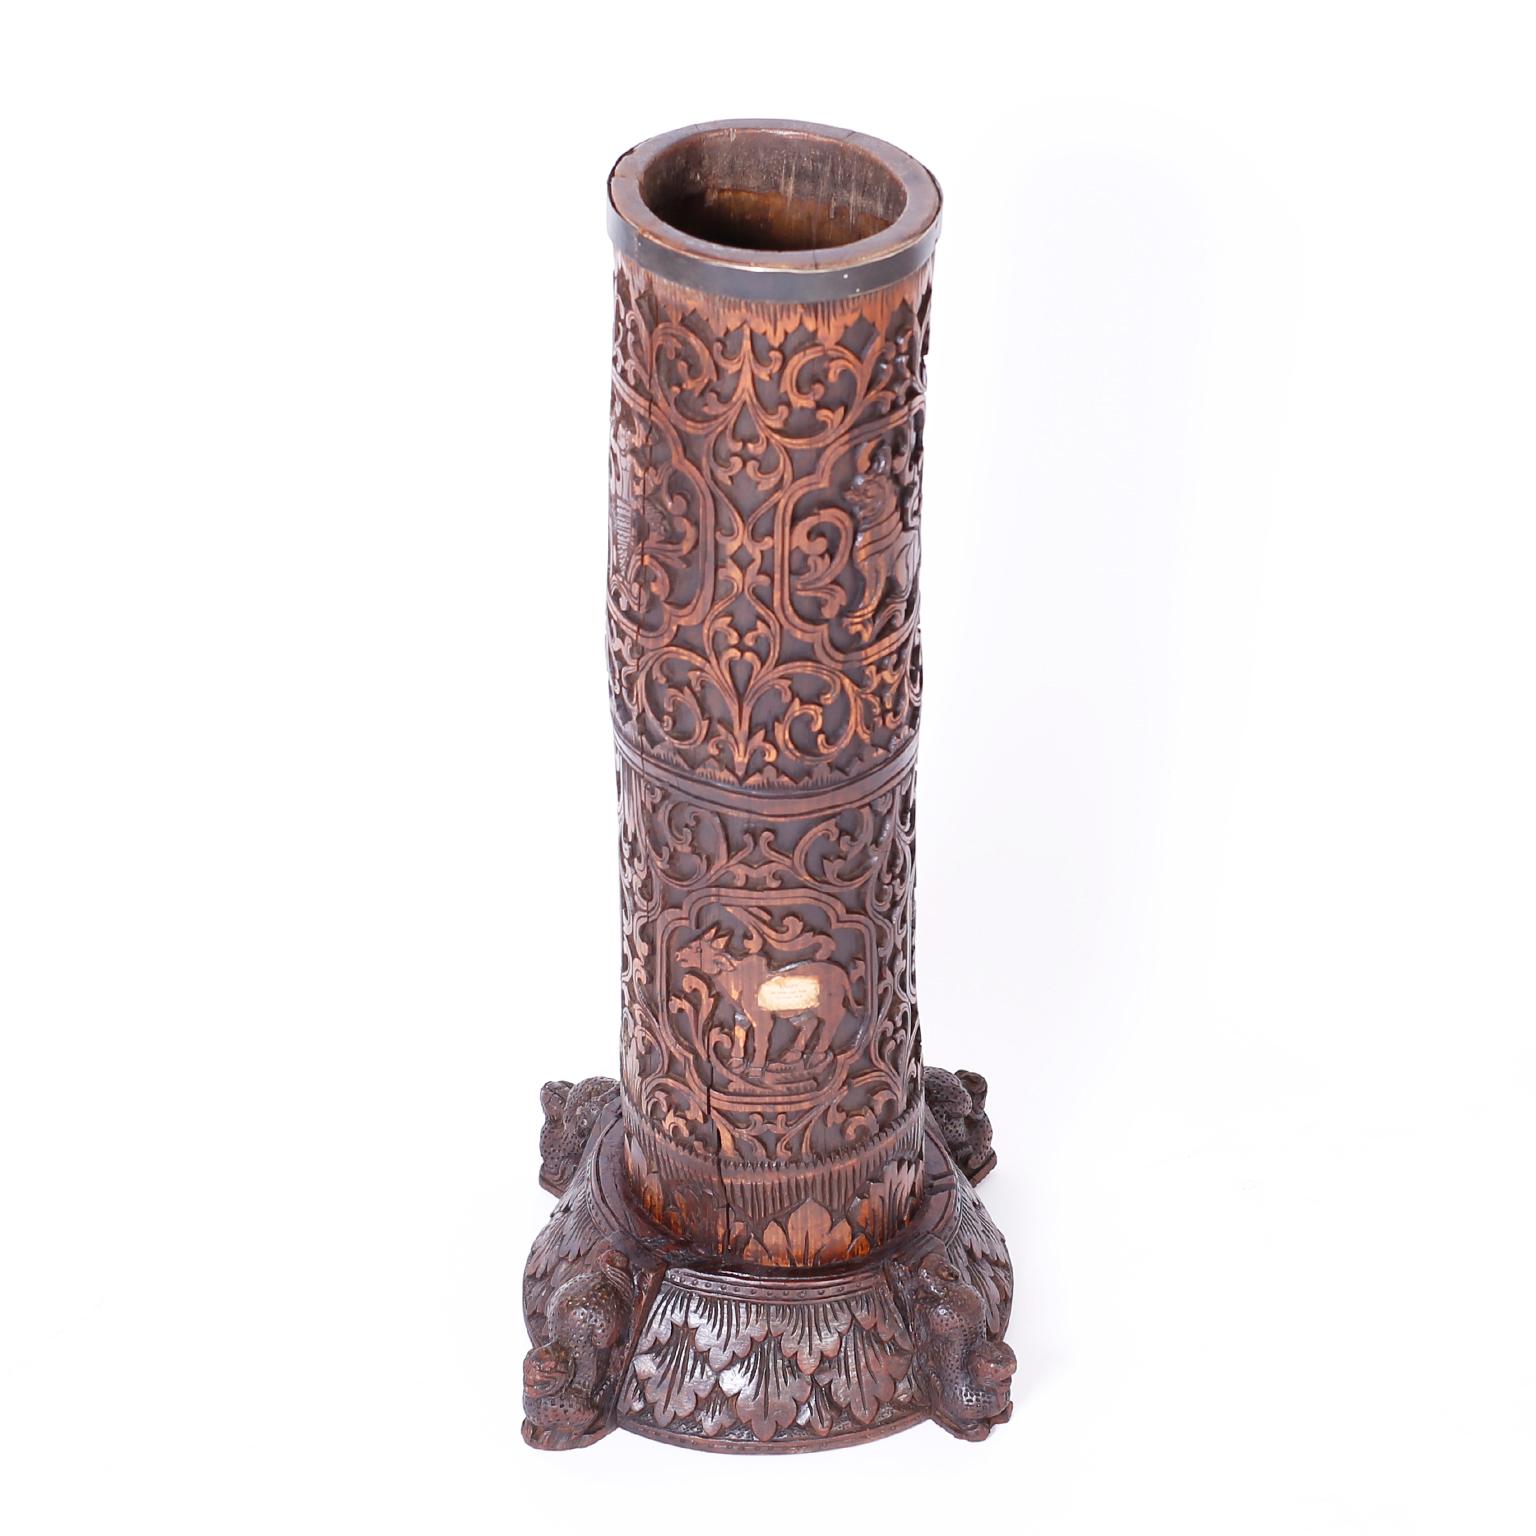 Enchanting antique Anglo-Indian umbrella stand crafted from a mahogany tree with elaborate floral and animal carvings sitting on a base with carved leaves and four cats. Interesting historical note, this piece at one time lived in London, as noted